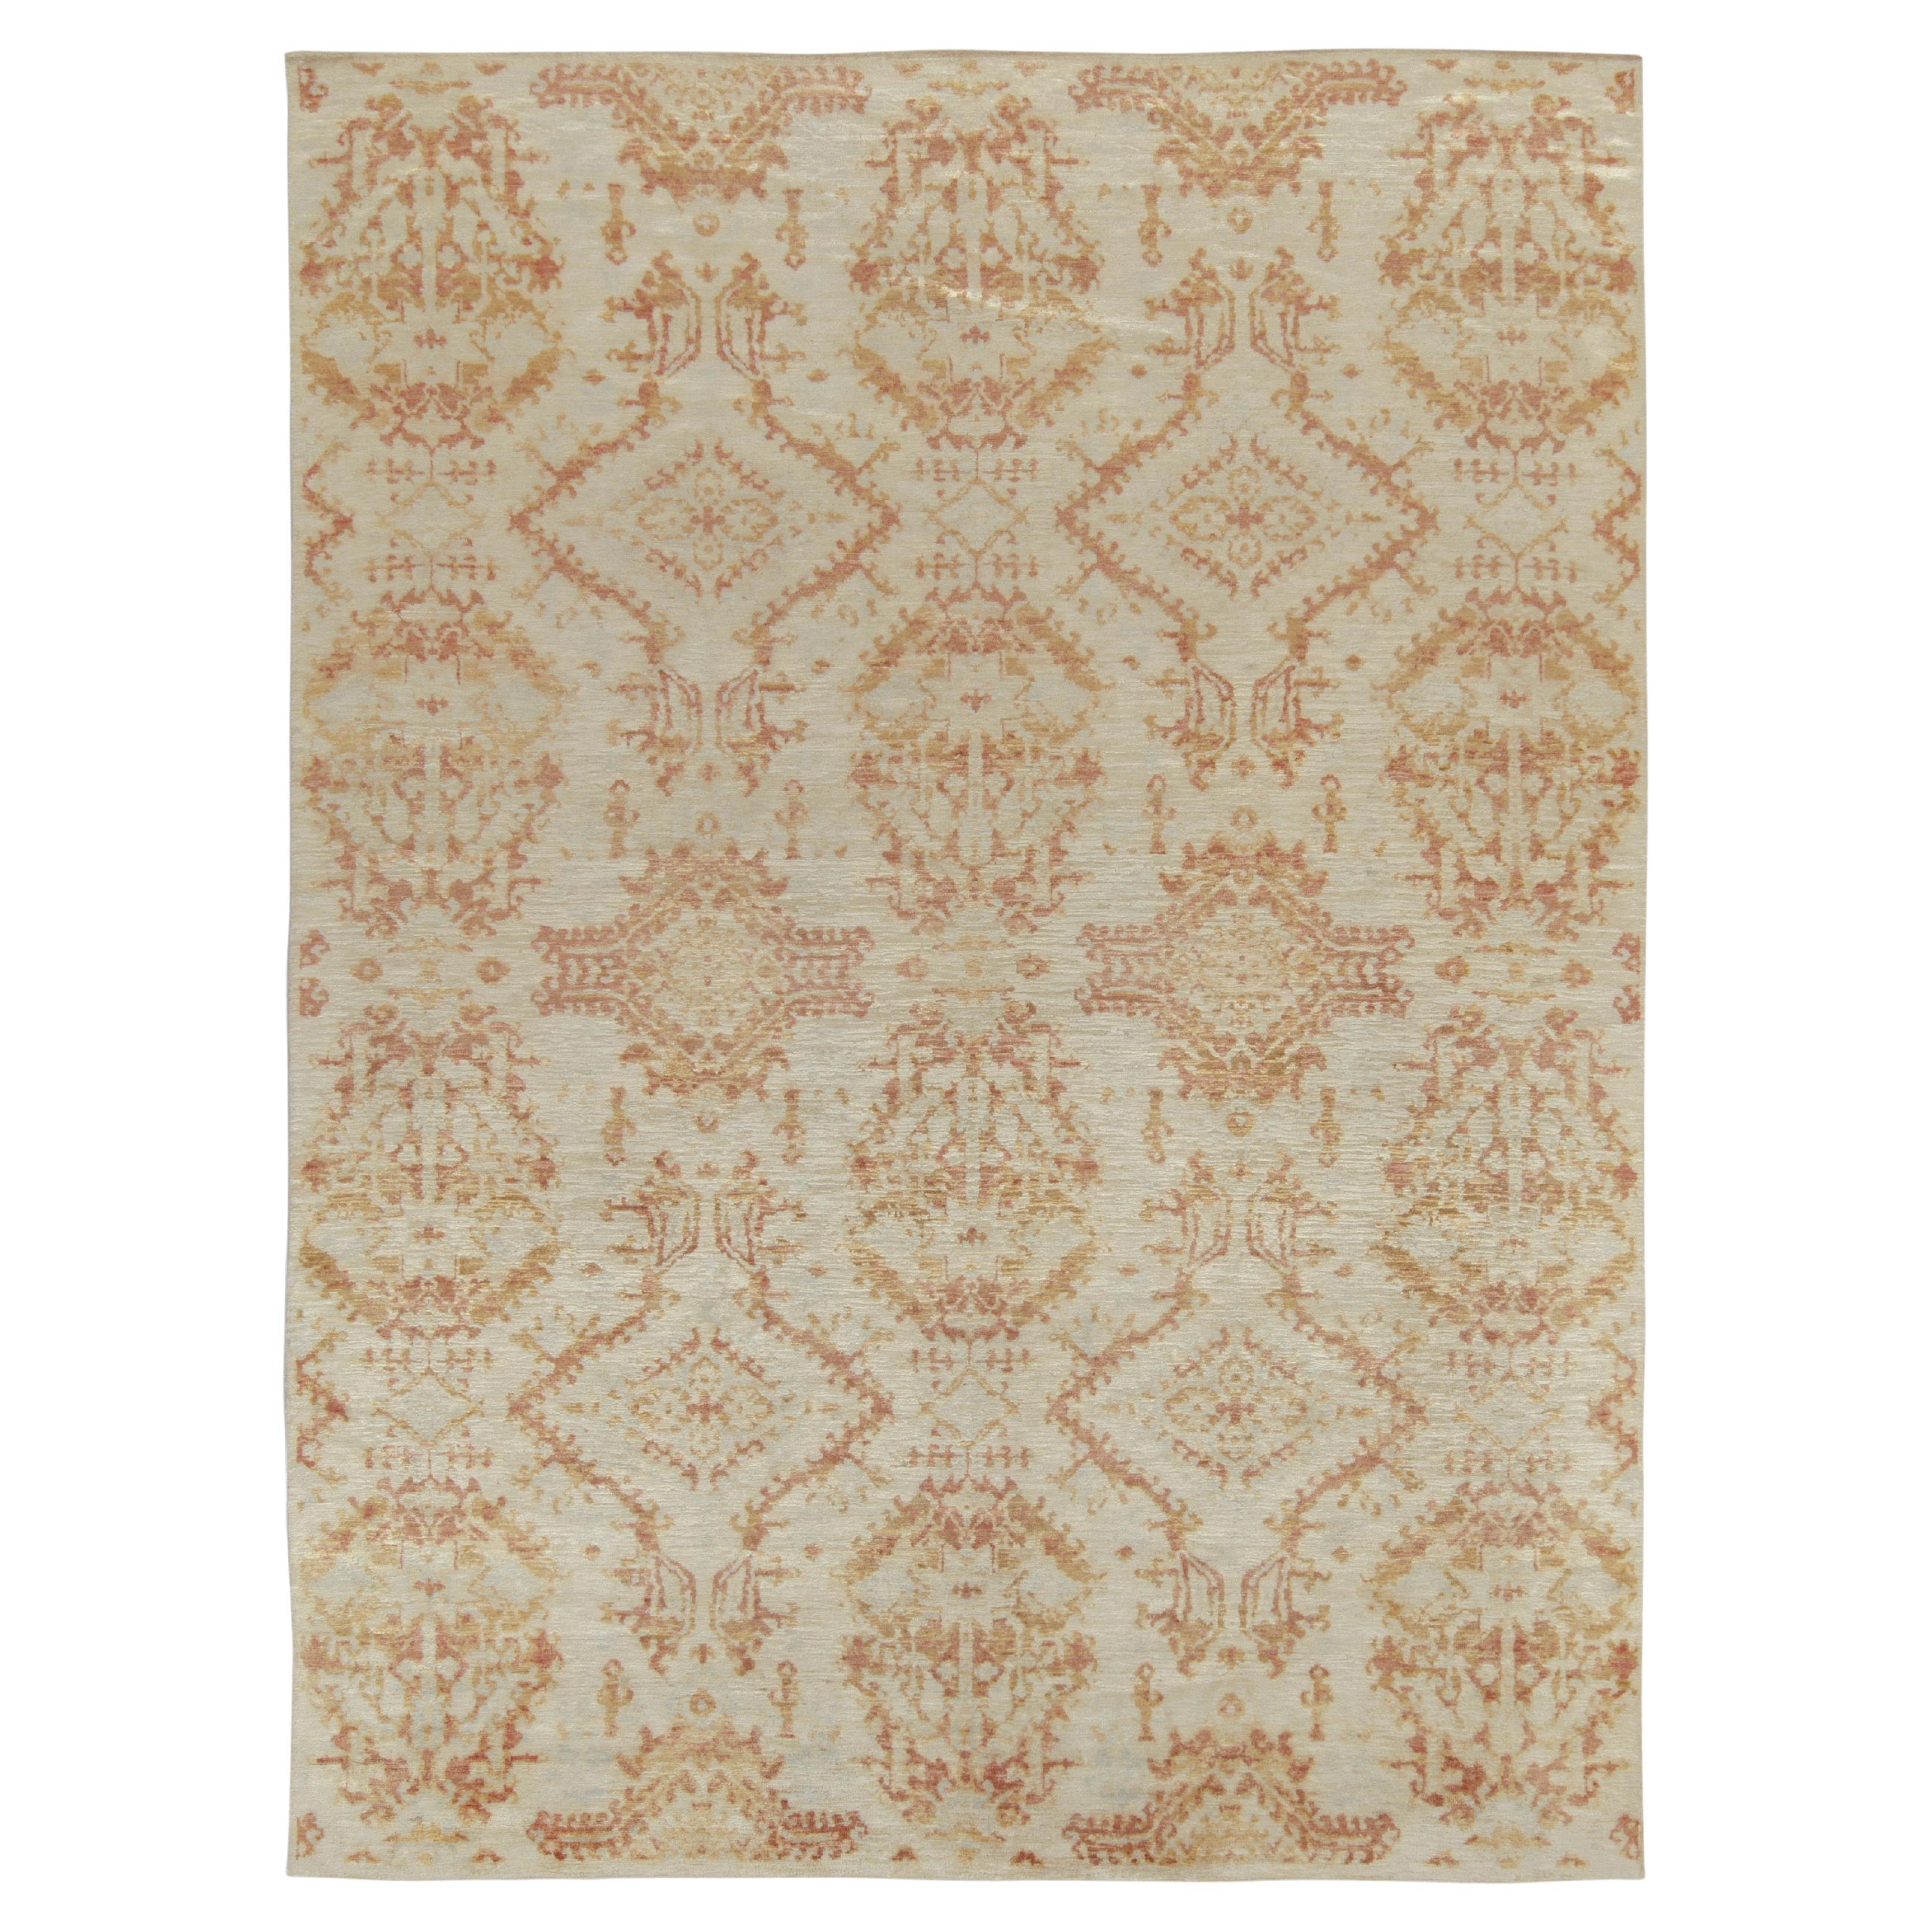 Rug & Kilim’s Contemporary Abstract Rug in Gray with Beige and Pink-Red Patterns